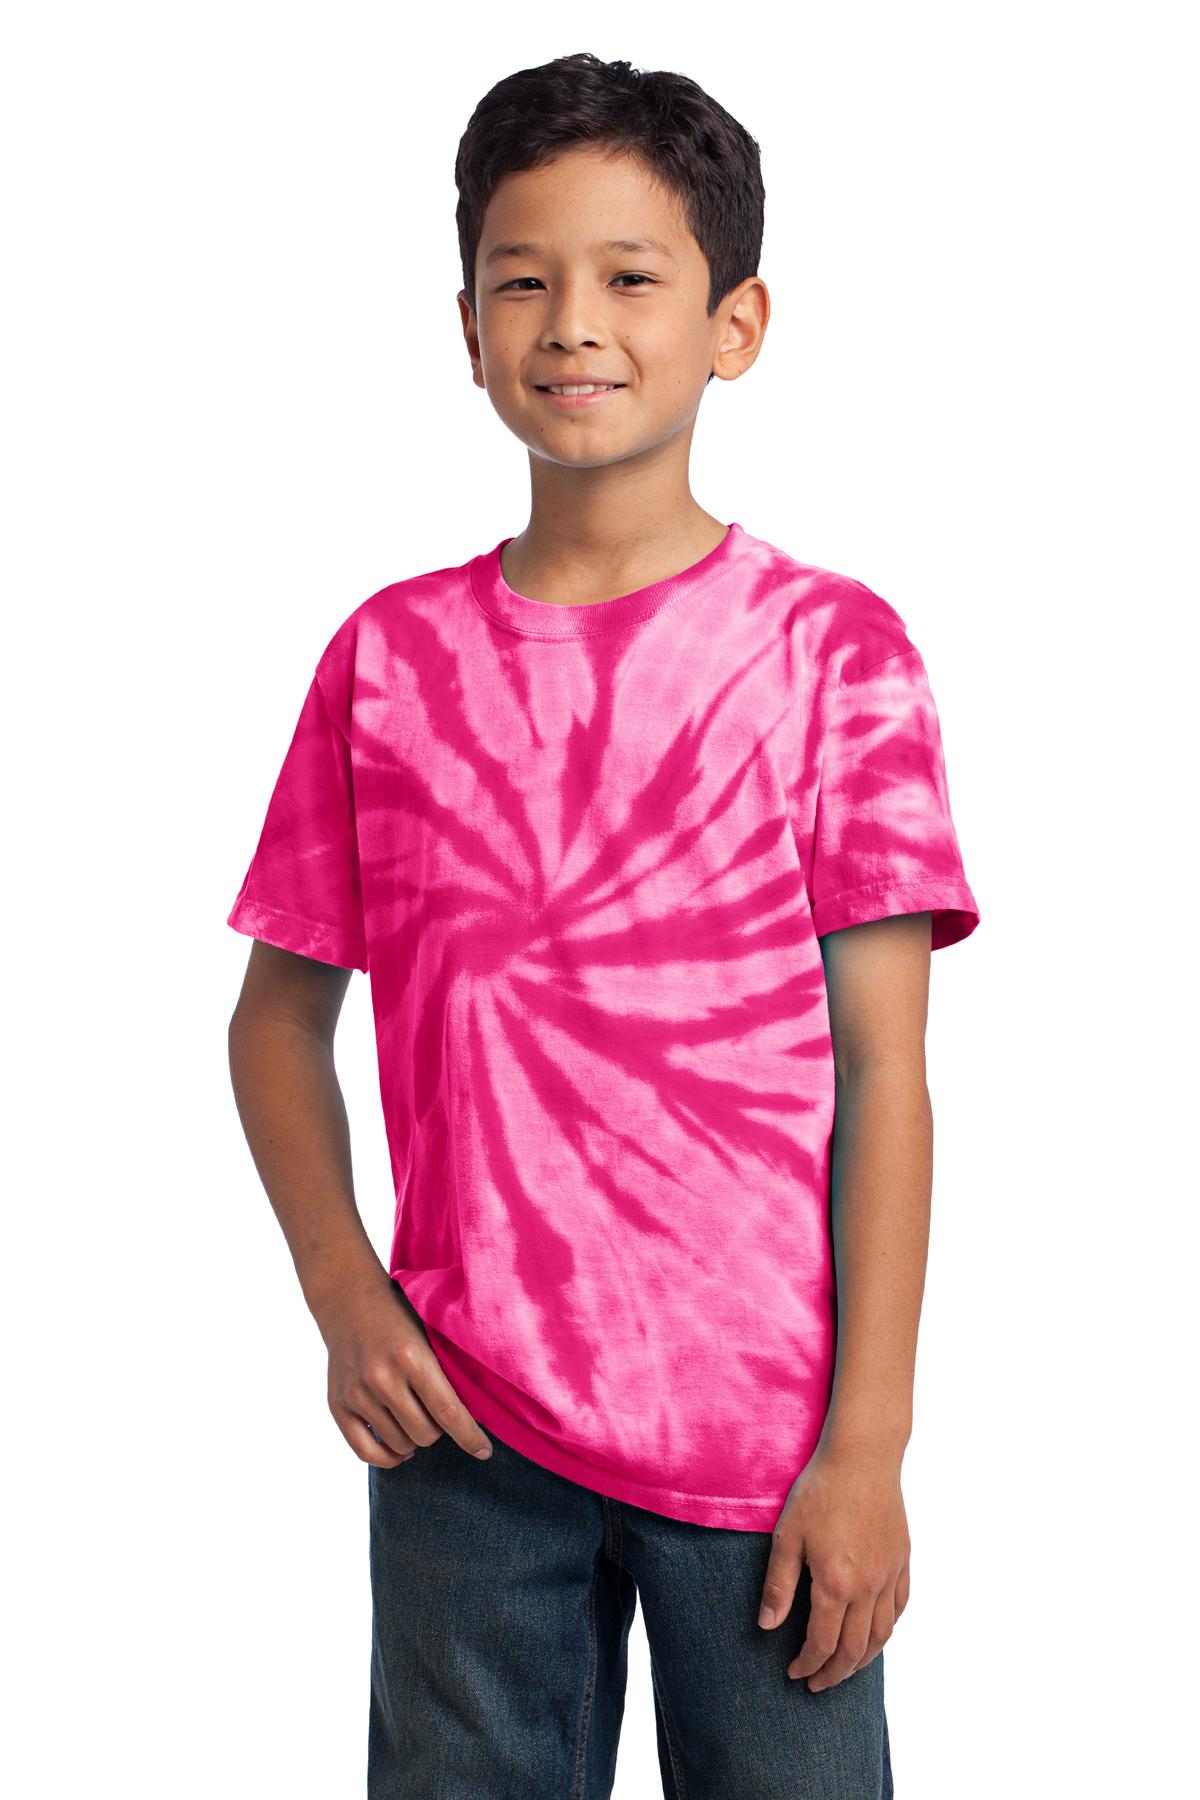  Port & Company Youth Essential Tie-Dye Tee>XS Pink PC147Y:  Fashion T Shirts: Clothing, Shoes & Jewelry